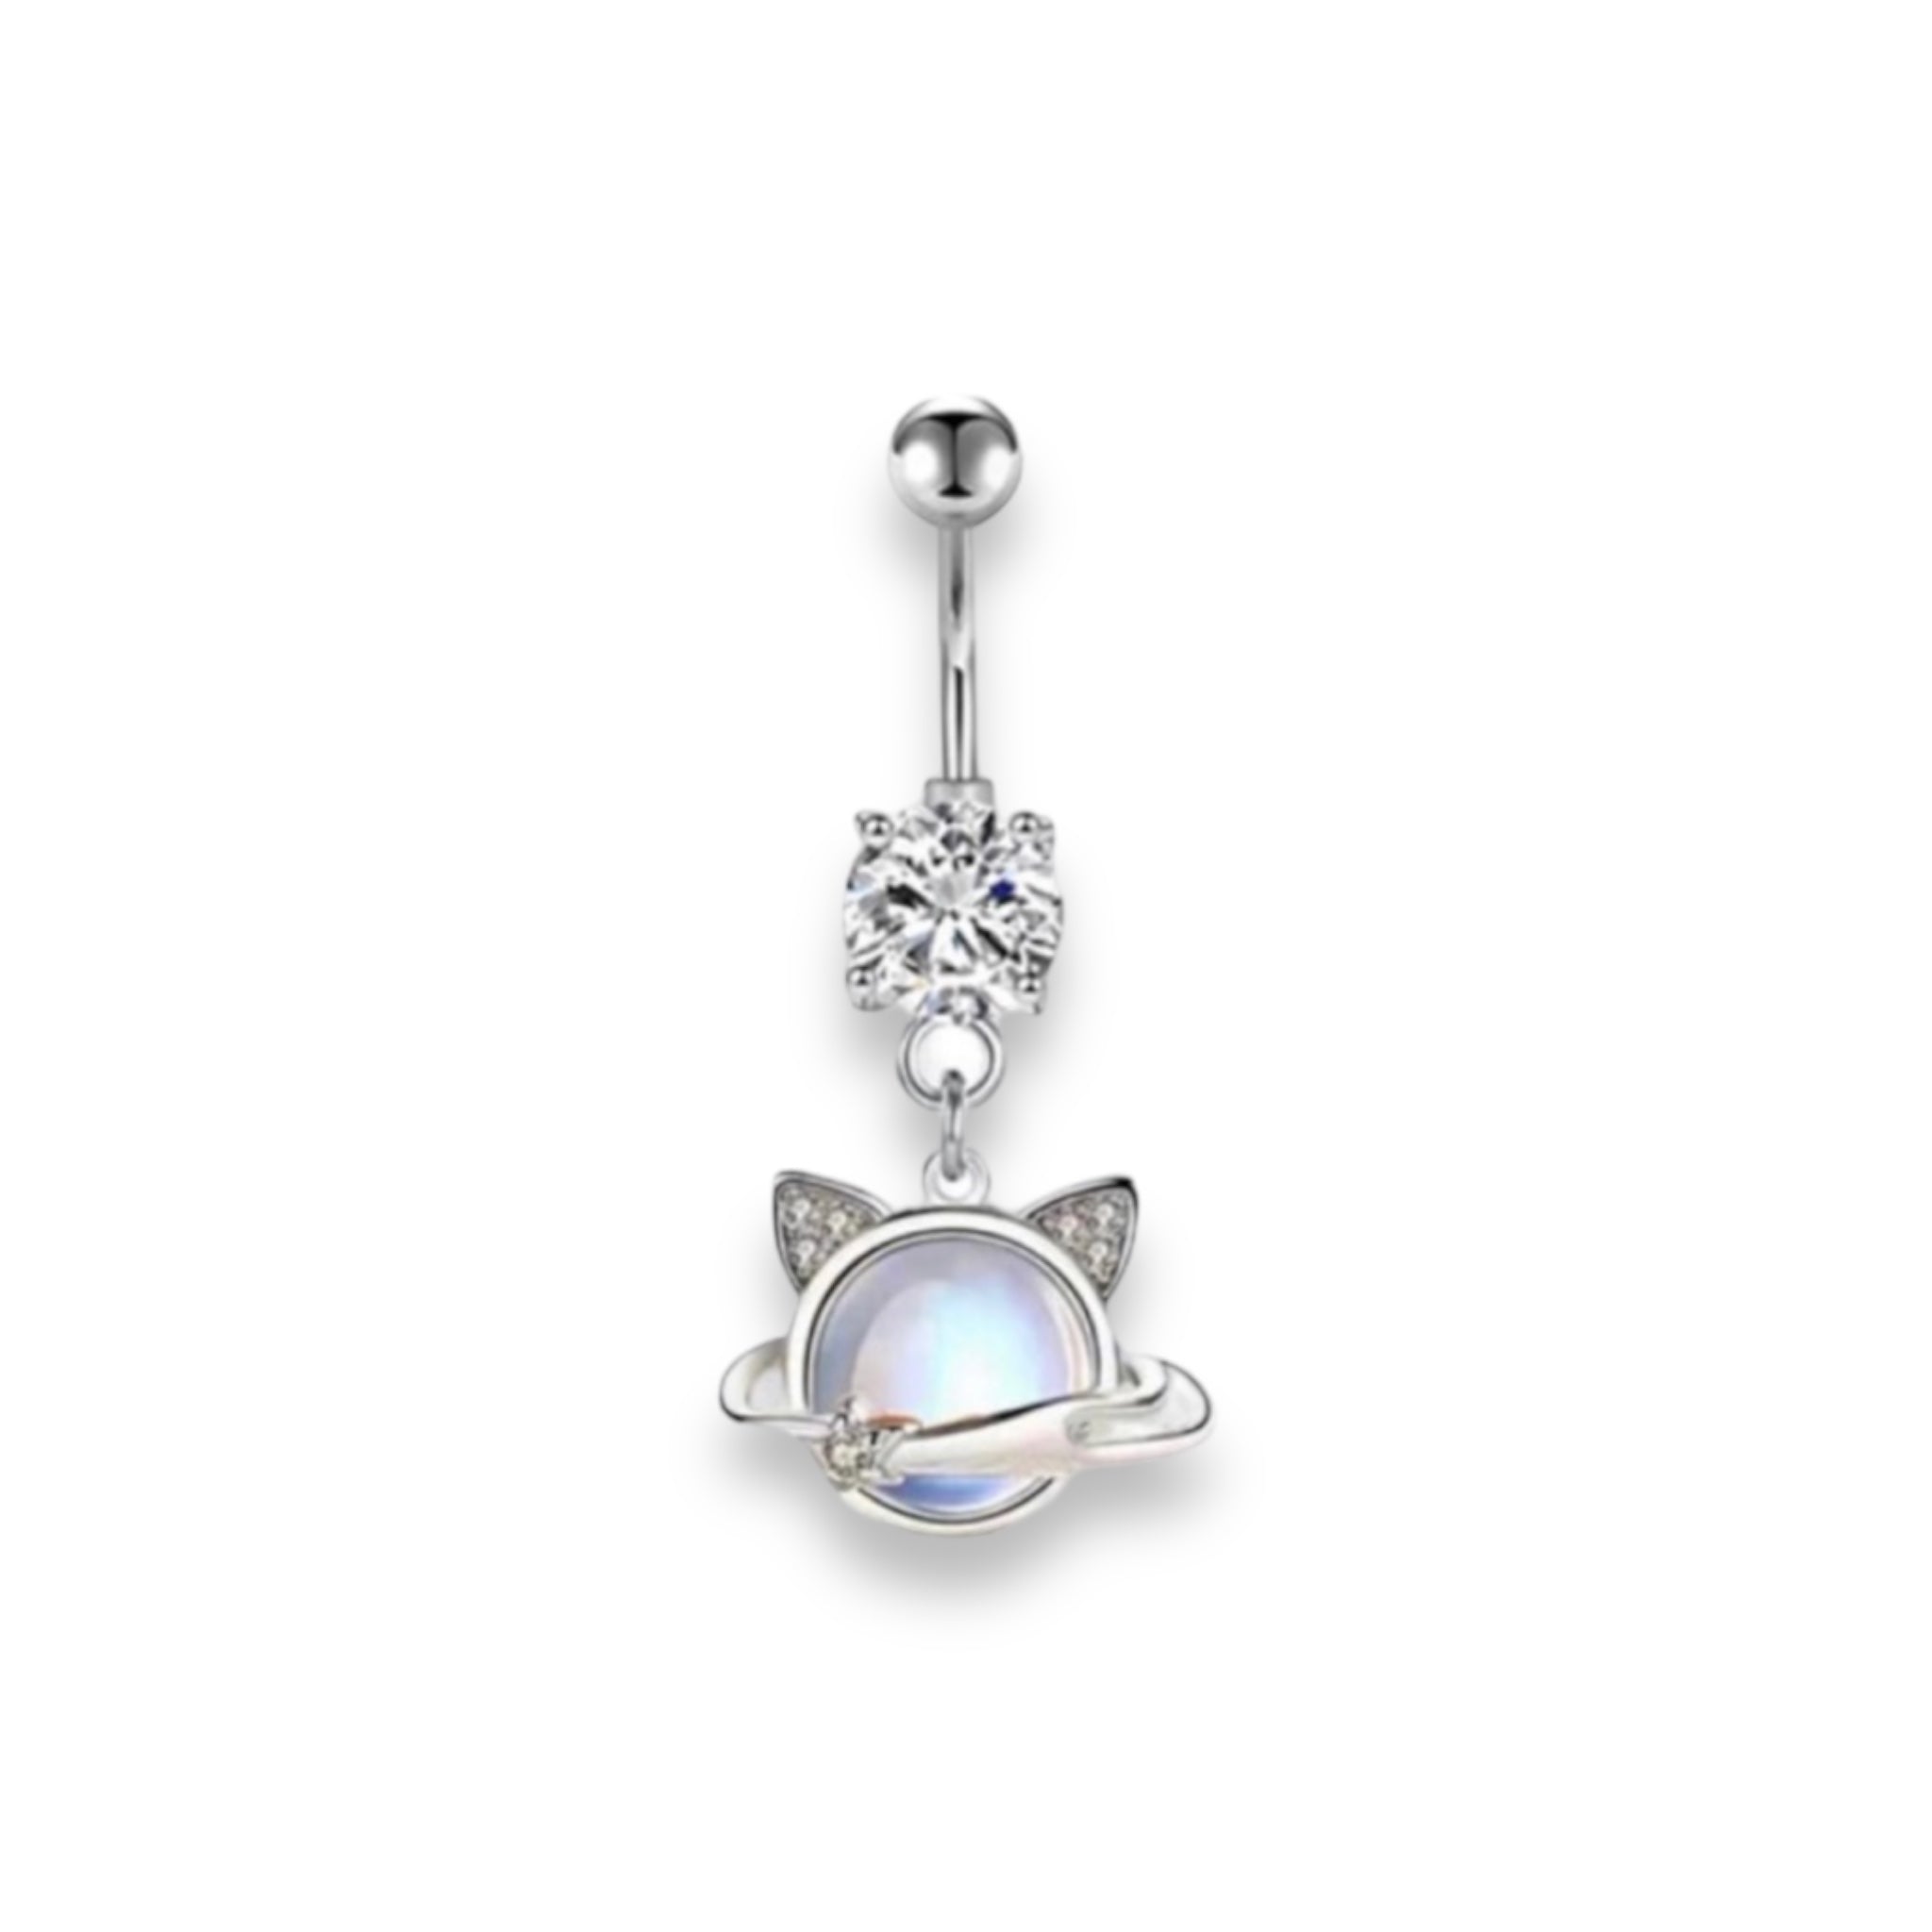 Our World Belly Ring